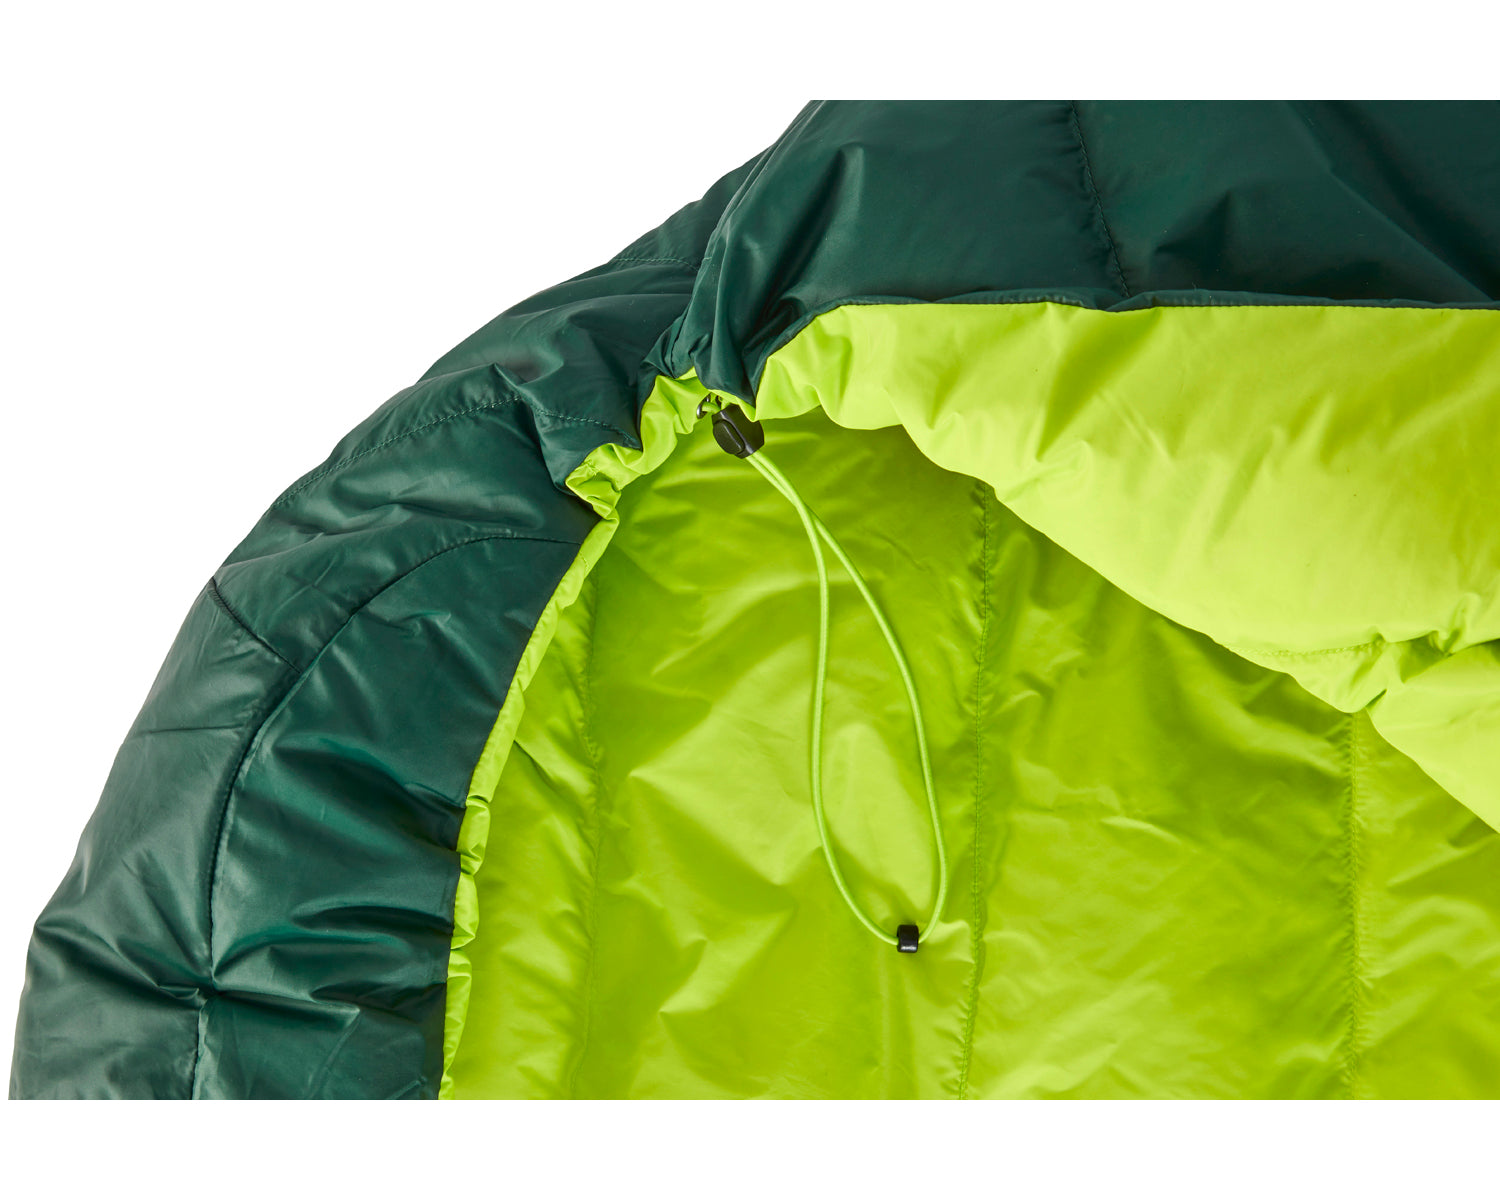 Tension Mummy 500 (RIGHT ZIP) - Scarab/Lime